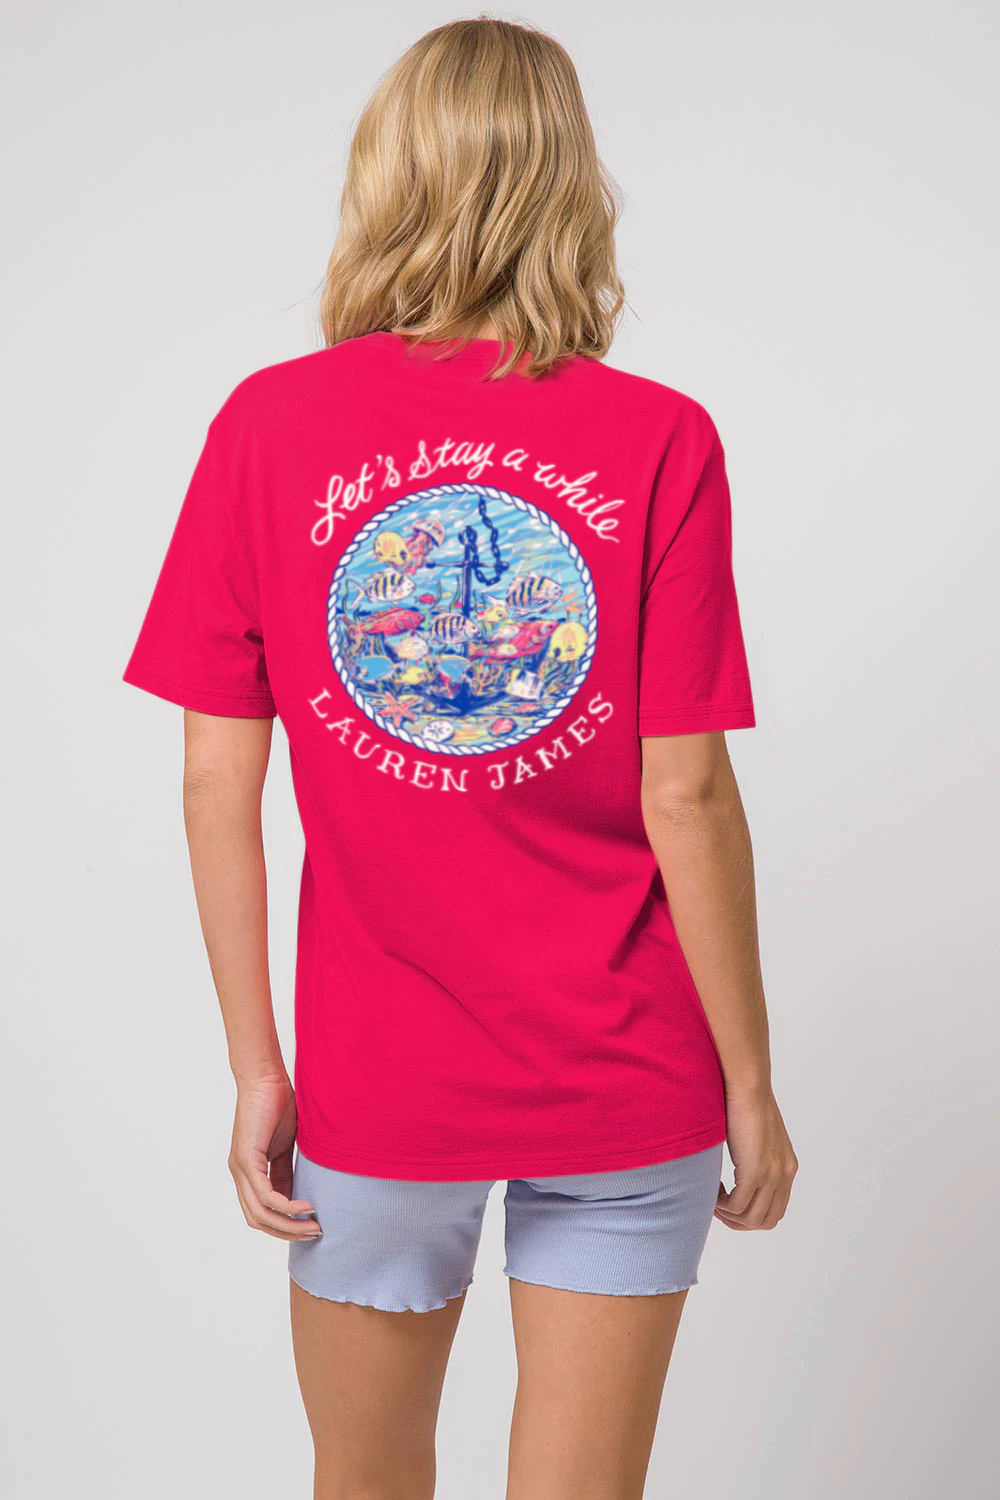 Lauren James Let's Stay Awhile Short Sleeve Tee Shirt